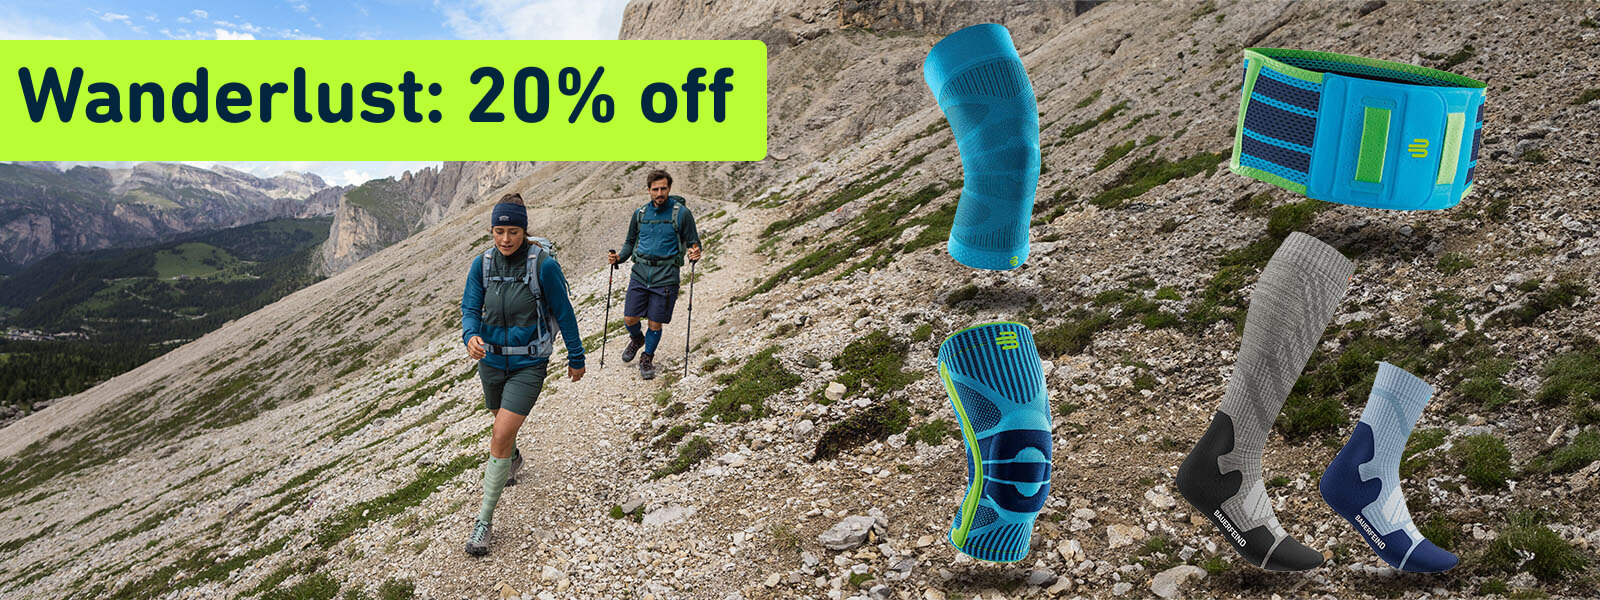  A banner for a hiking products discount promotion featuring two hikers and various products.